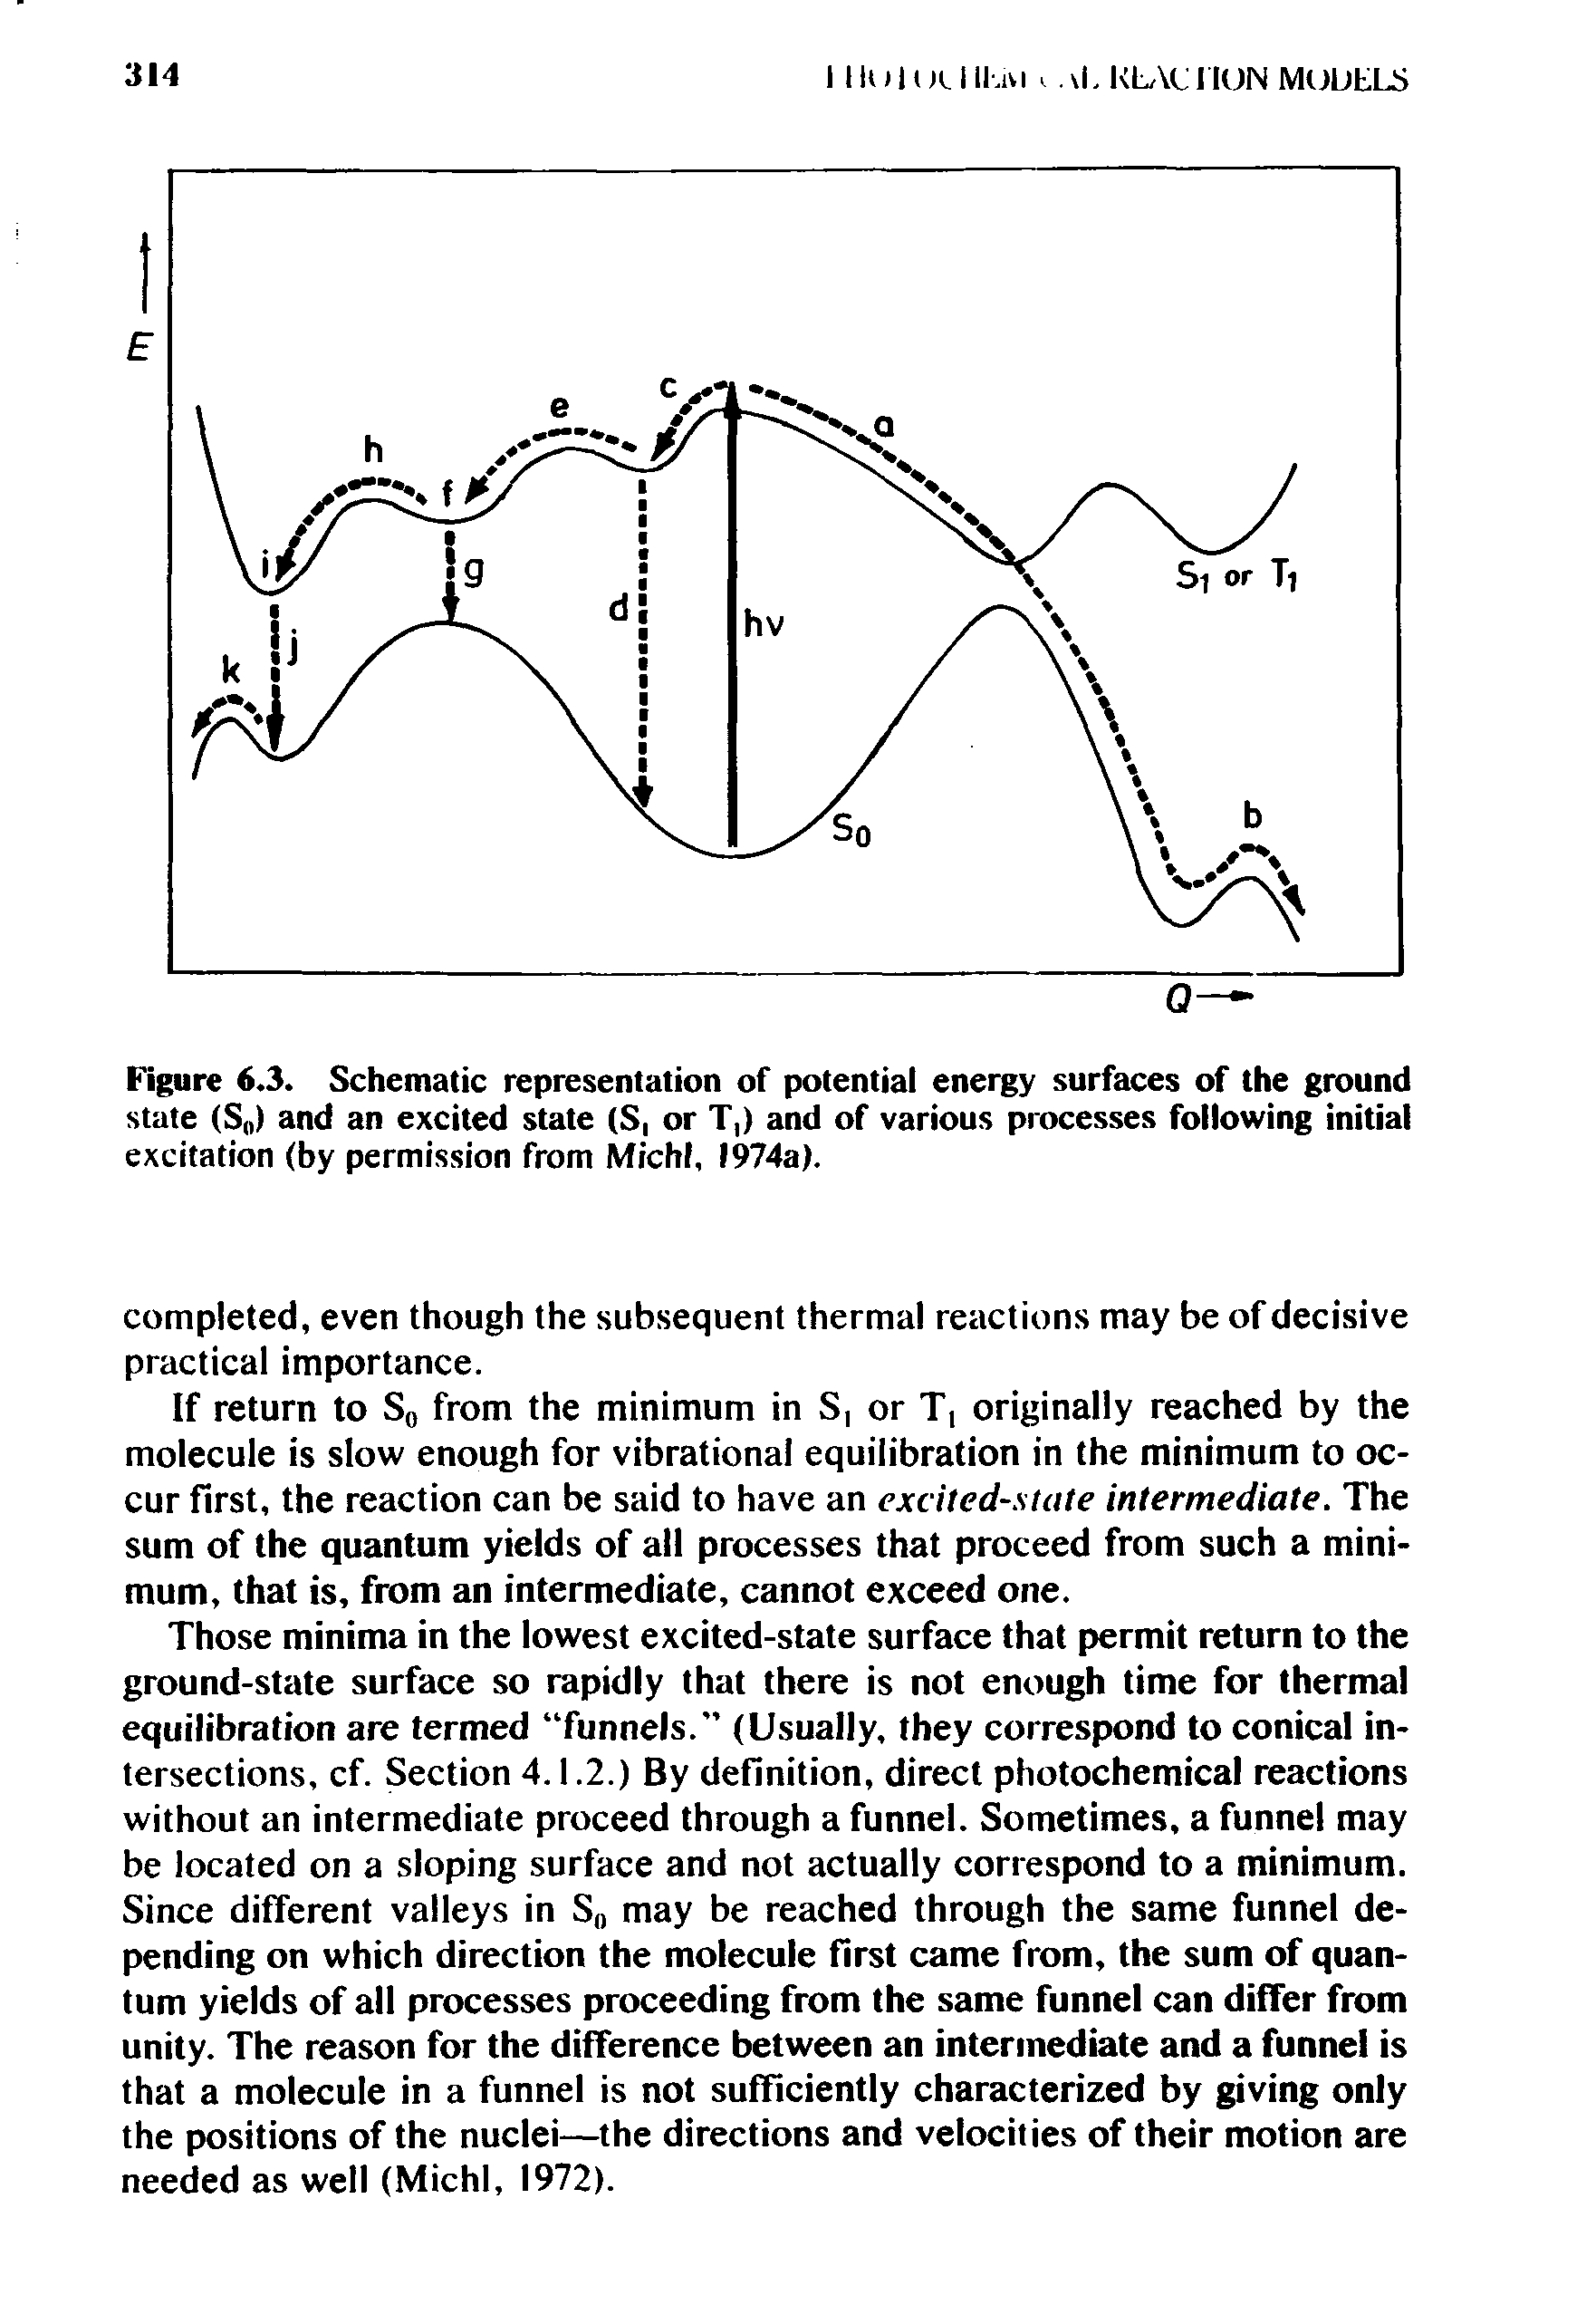 Figure 6.3. Schematic representation of potential energy surfaces of the ground state (S ) and an excited state (S, or T,) and of various processes following initial excitation (by permission from IVfichl, 1974a).